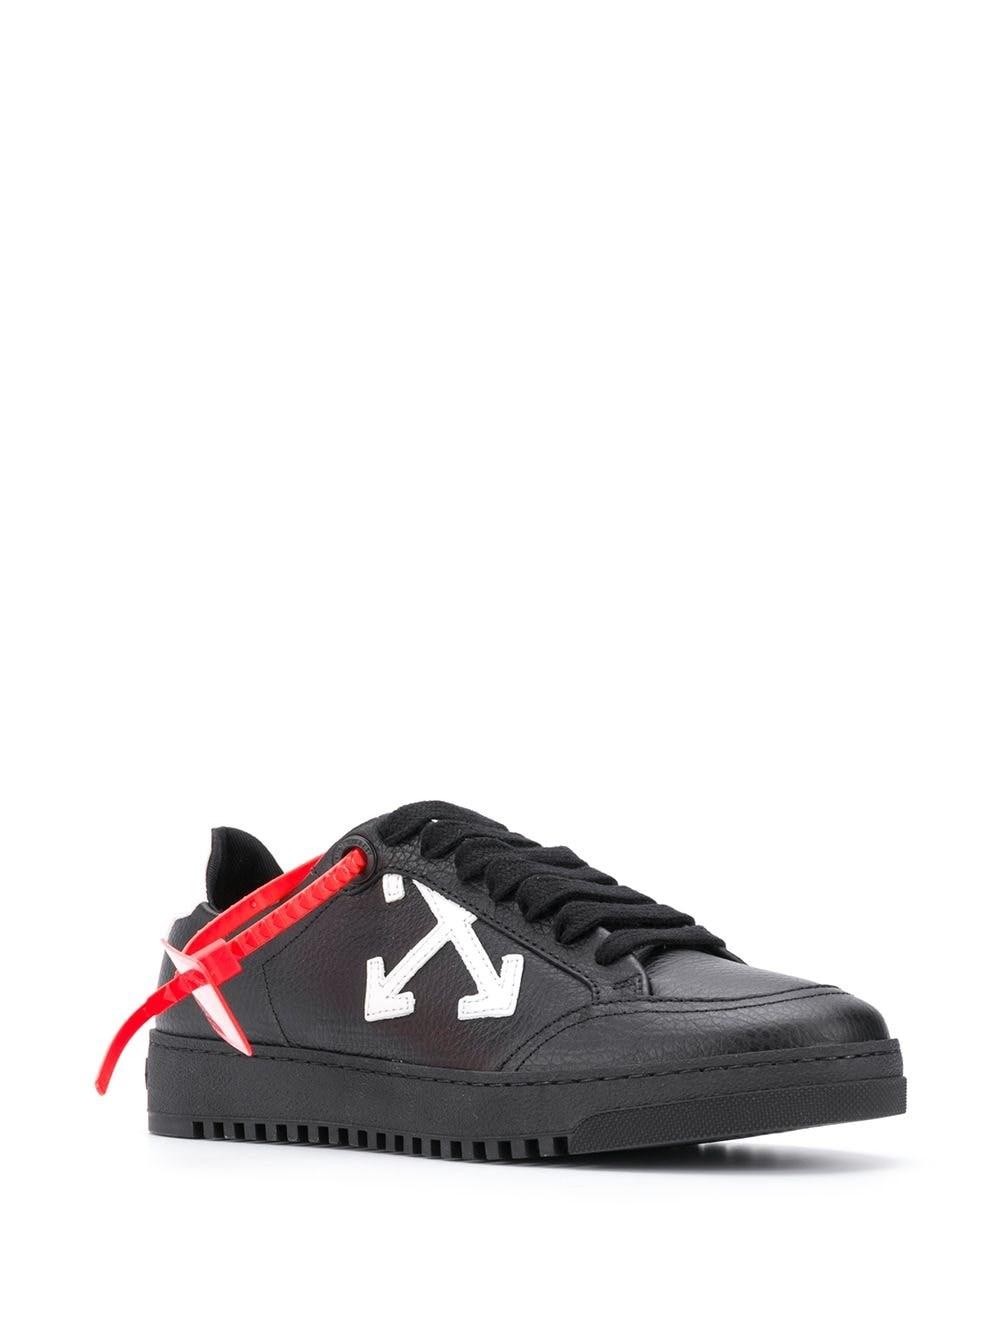 Off-White c/o Virgil Abloh Arrows 2.0 Low Top Leather Sneakers in Black |  Lyst